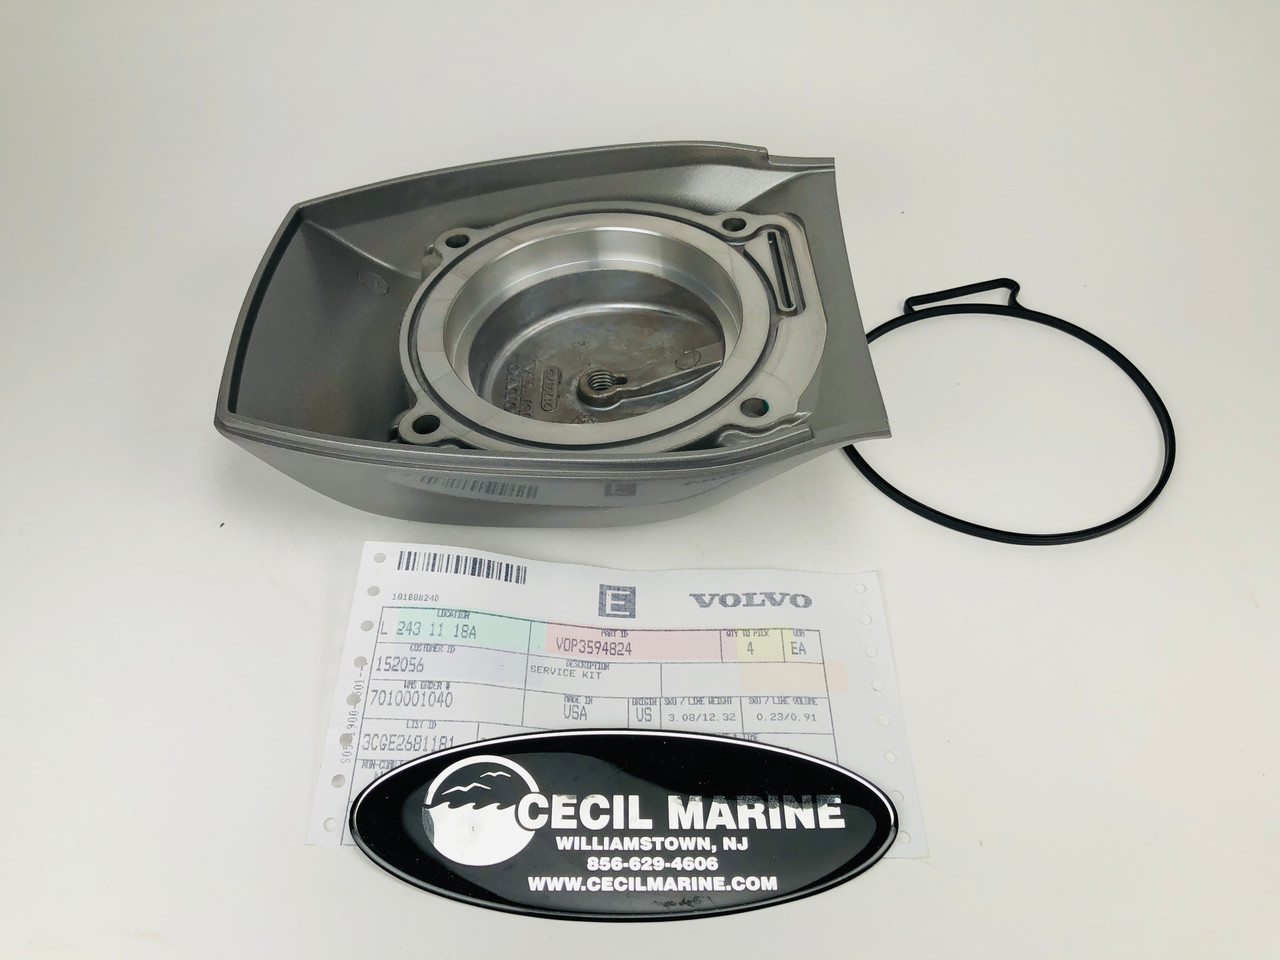 $389.99*GENUINE VOLVO no tax* UPPER DRIVE TOP COVER & GASKET SERVICE KIT( Old part number 3842916 & 21709796 ) 3594824 *In stock & ready to ship!